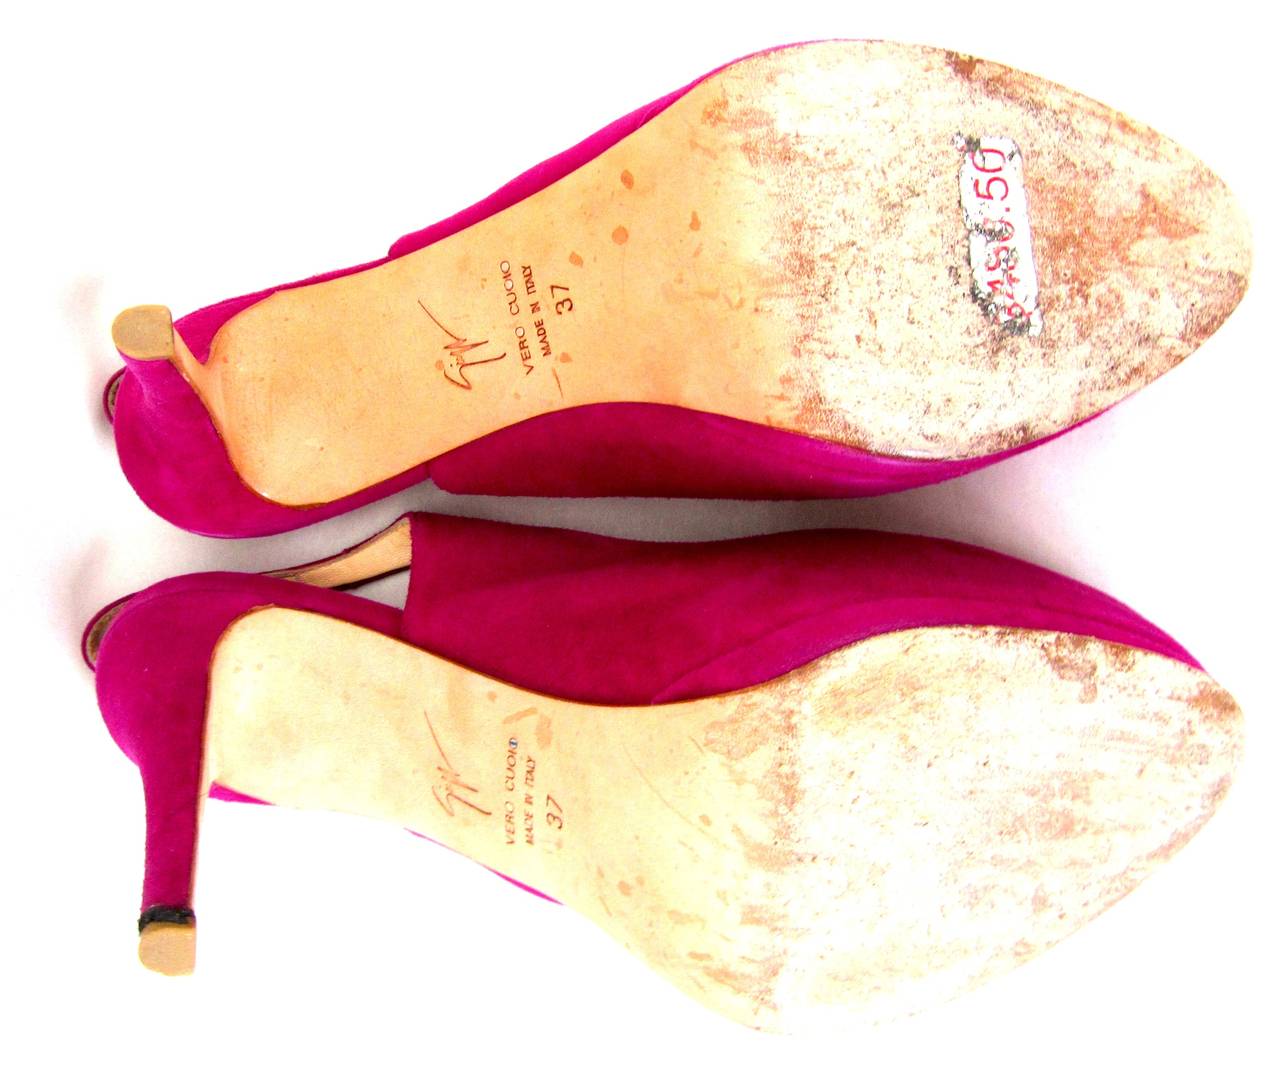 Giuseppe Zanotti Pink Fuchsia Suede Pumps with Heel Strap - Size 37 For Sale 1